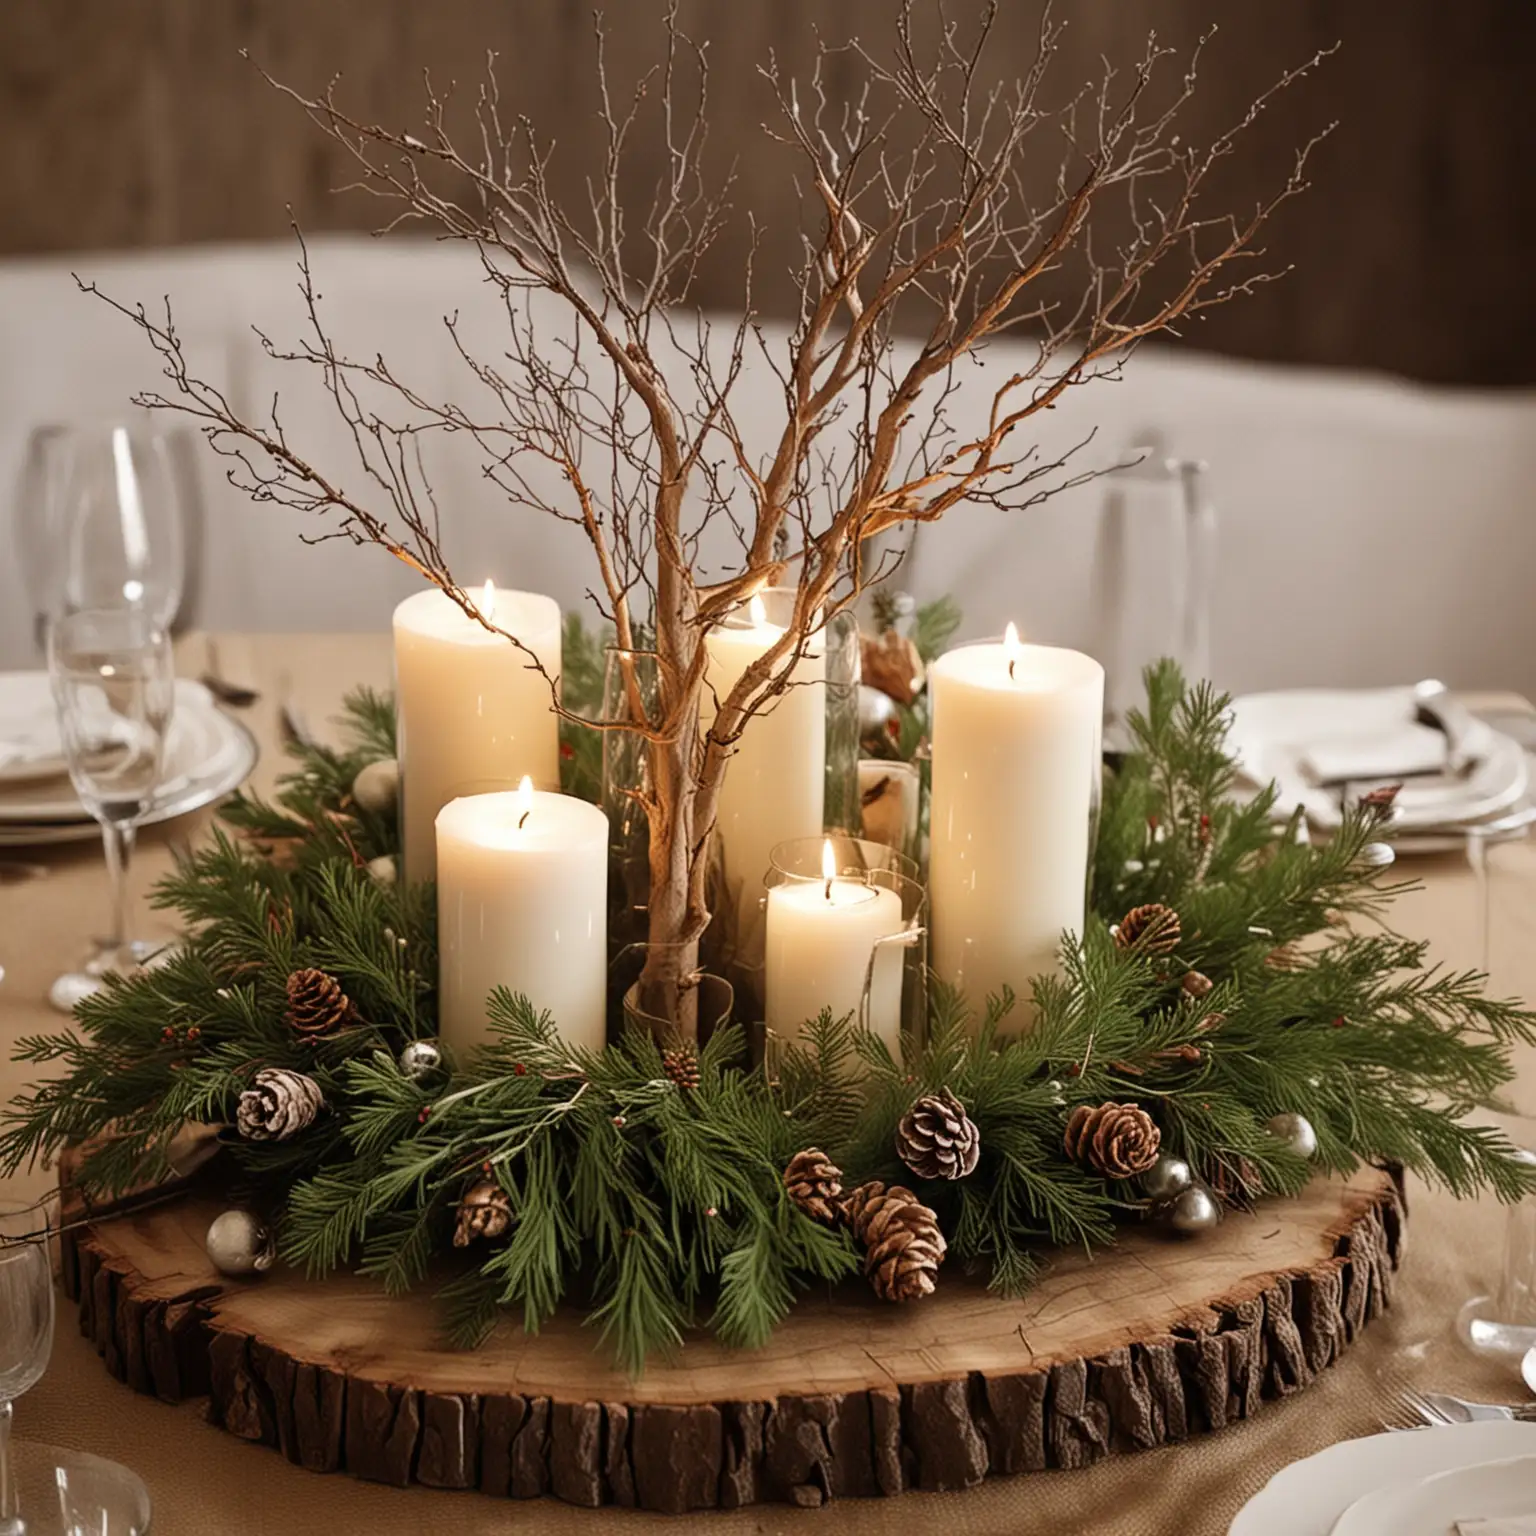 centerpiece with natural branches for a rustic centerpiece good for a winter wedding